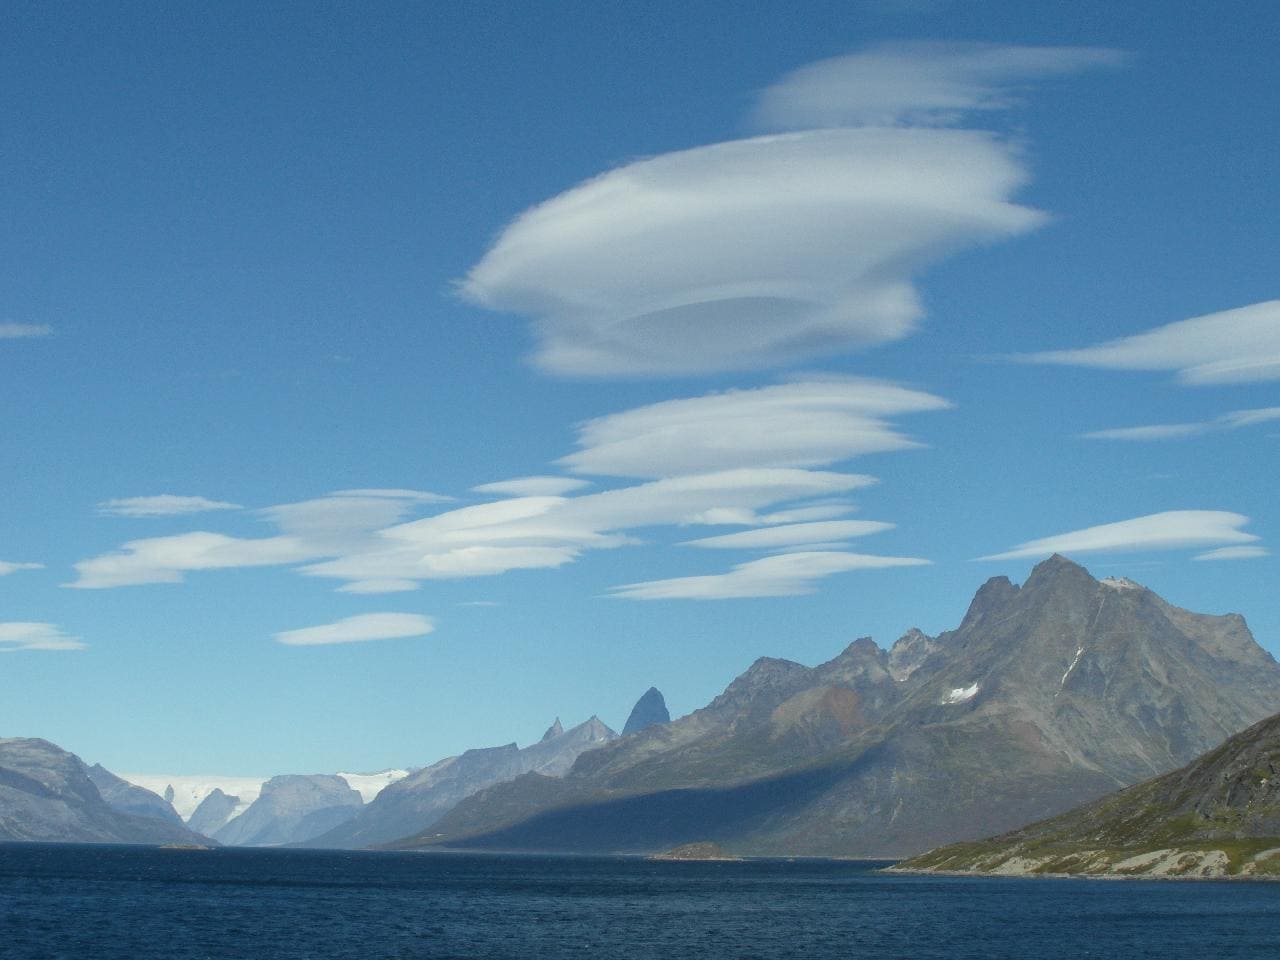 Lenticular Clouds forming from air flowing over mountains